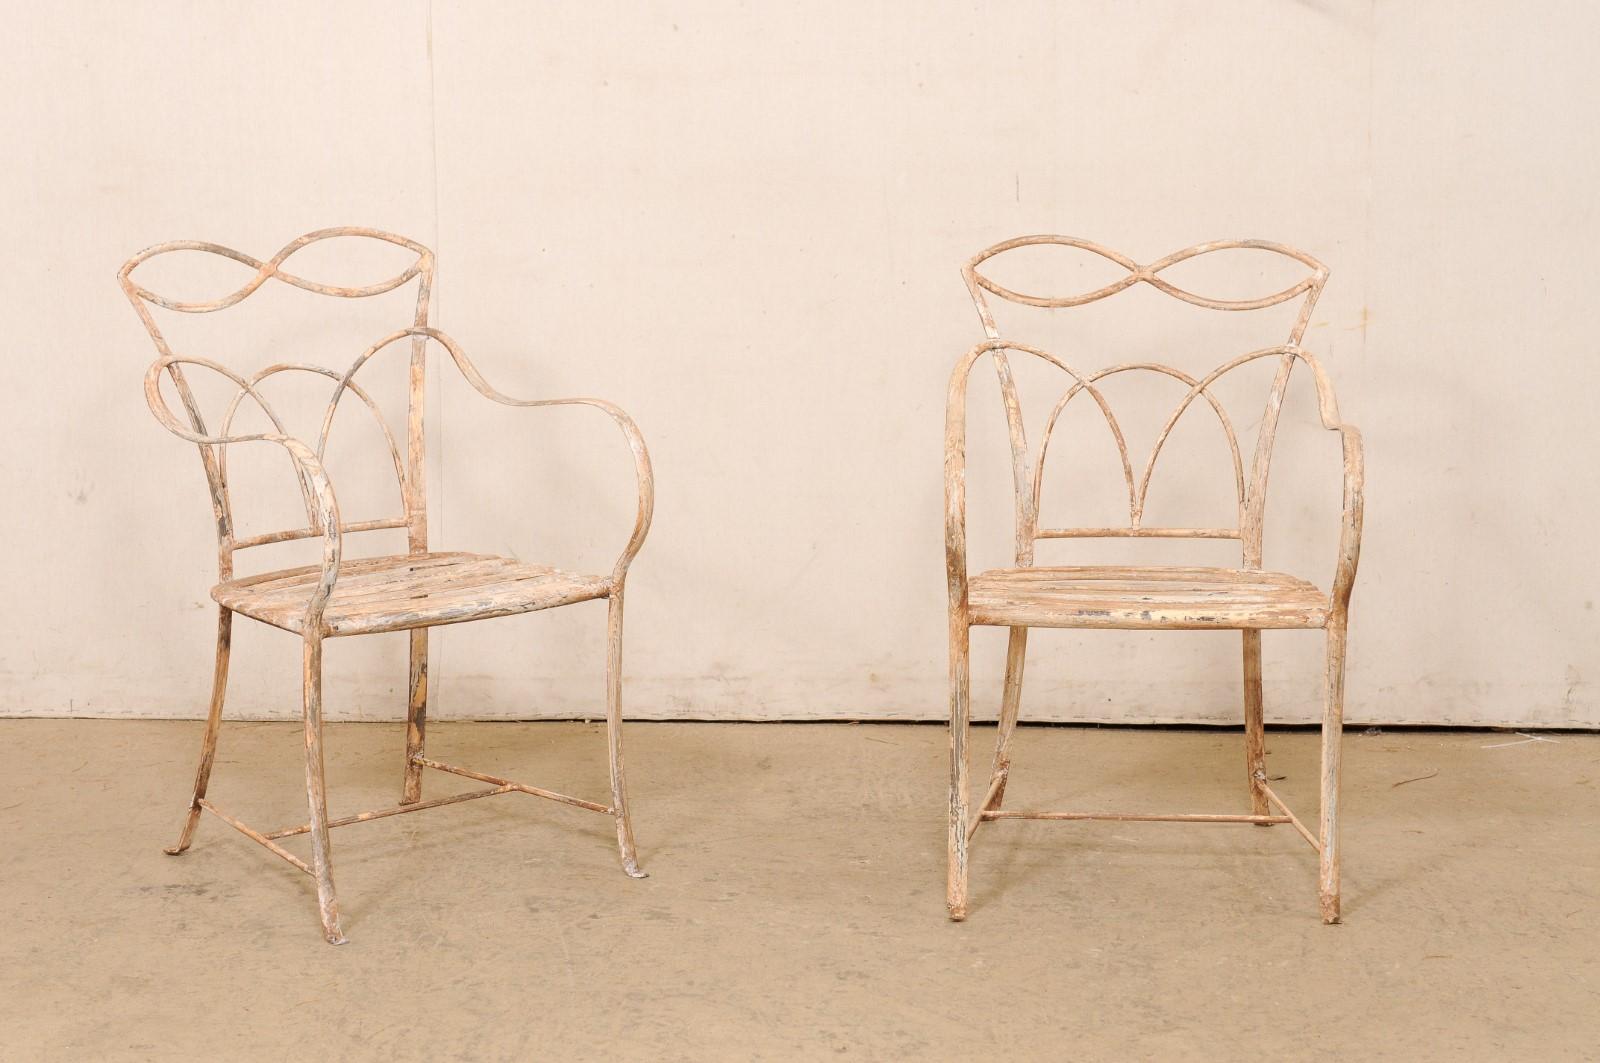 A French pair of painted iron patio conversation chairs. This vintage pair of iron chairs from France have nicely designed backs that are open with an intertwining lattice design with almond and arch shapes, that give these chairs a light and airy